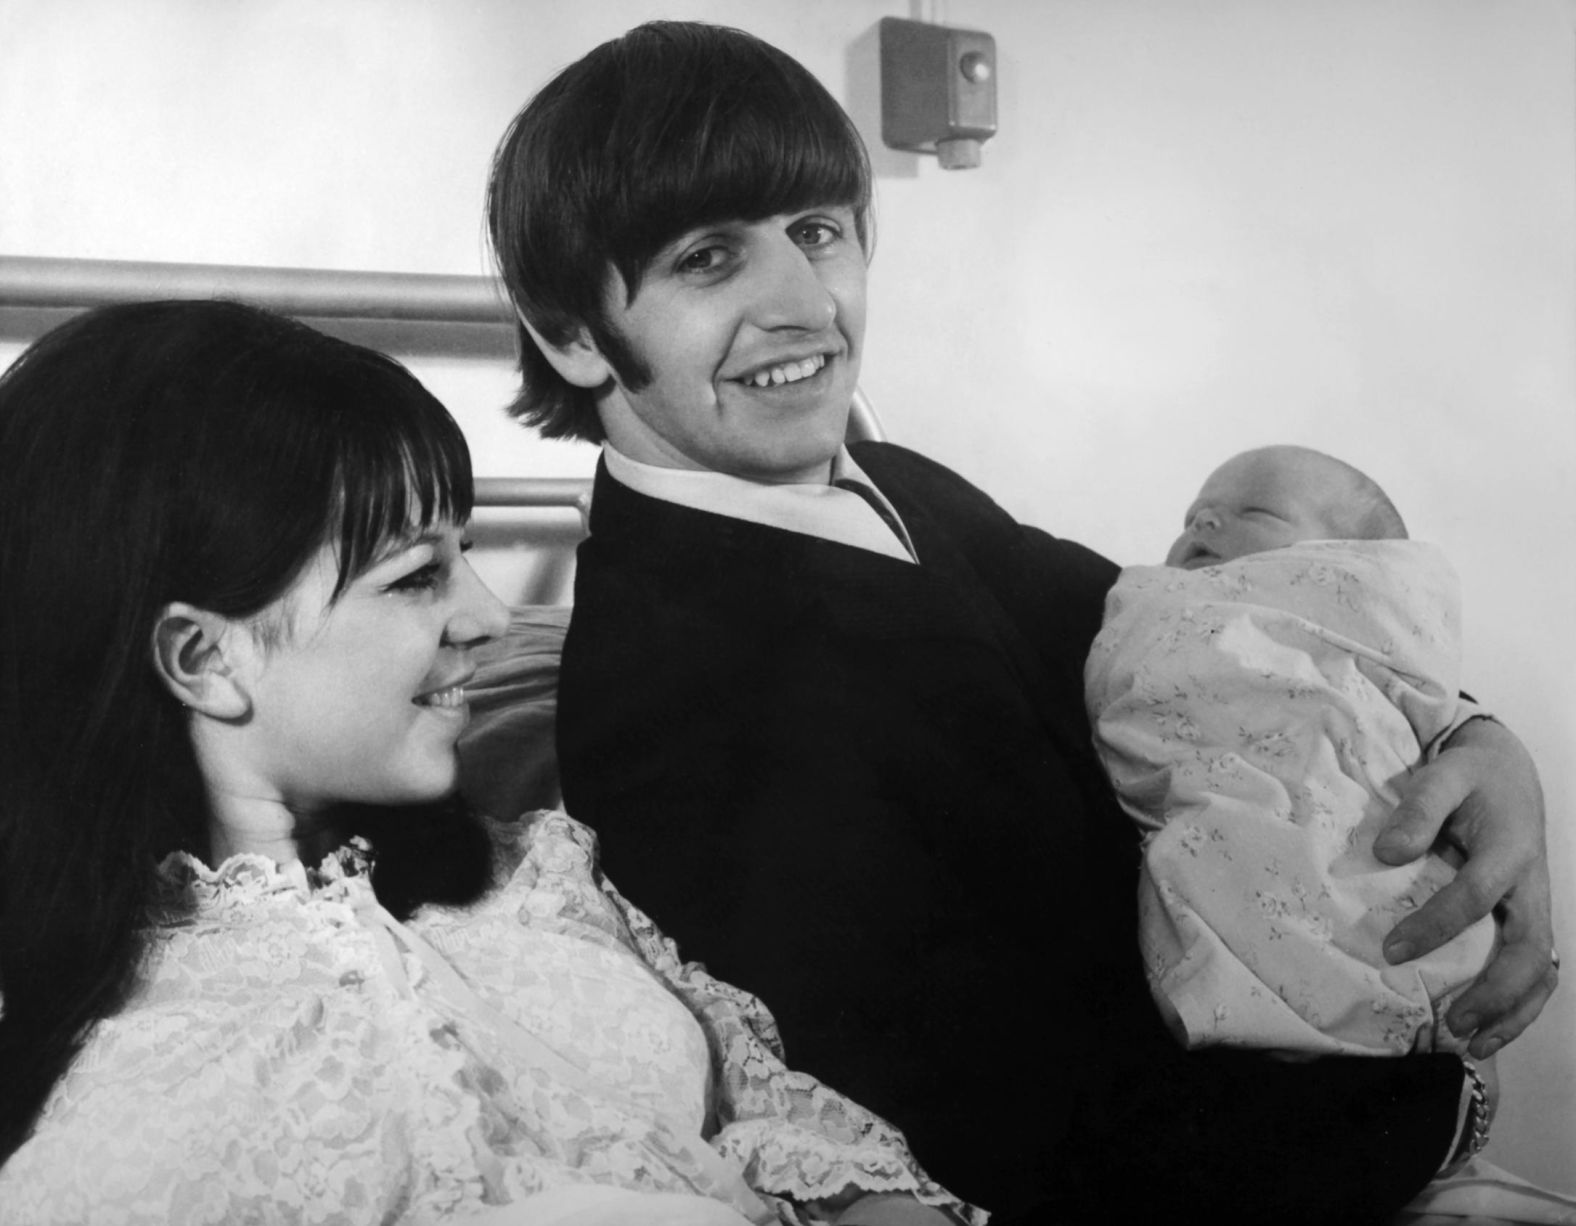 Starr holds his newborn son, Zak, in September 1965. He had three children with his first wife before they were divorced in 1975.